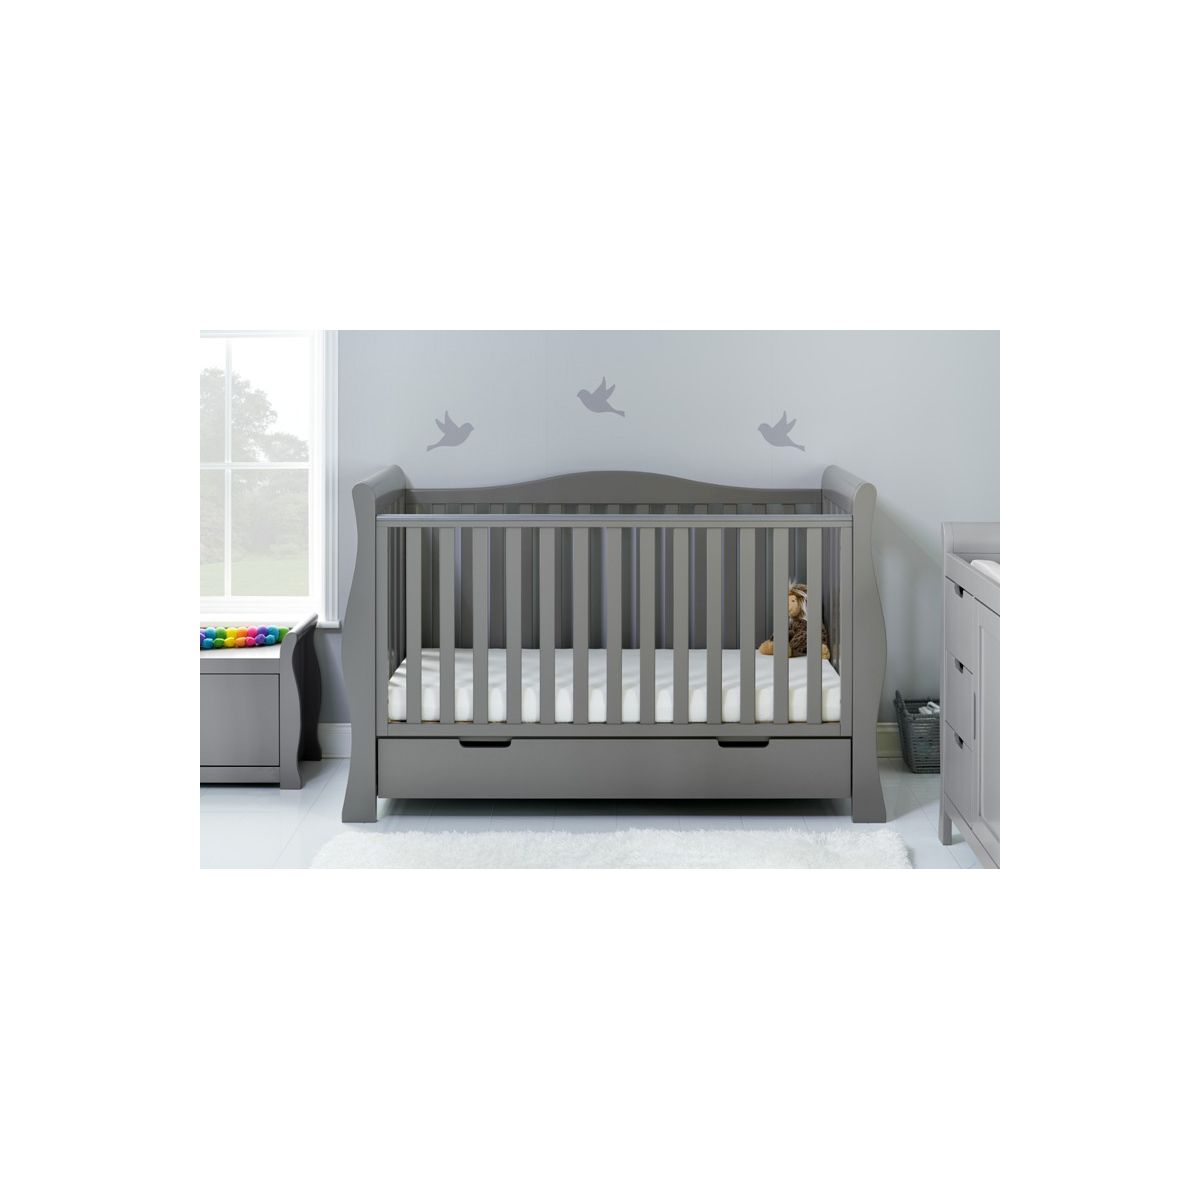 Obaby Stamford Luxe Sleigh Cot Bed Including Underbed Drawer